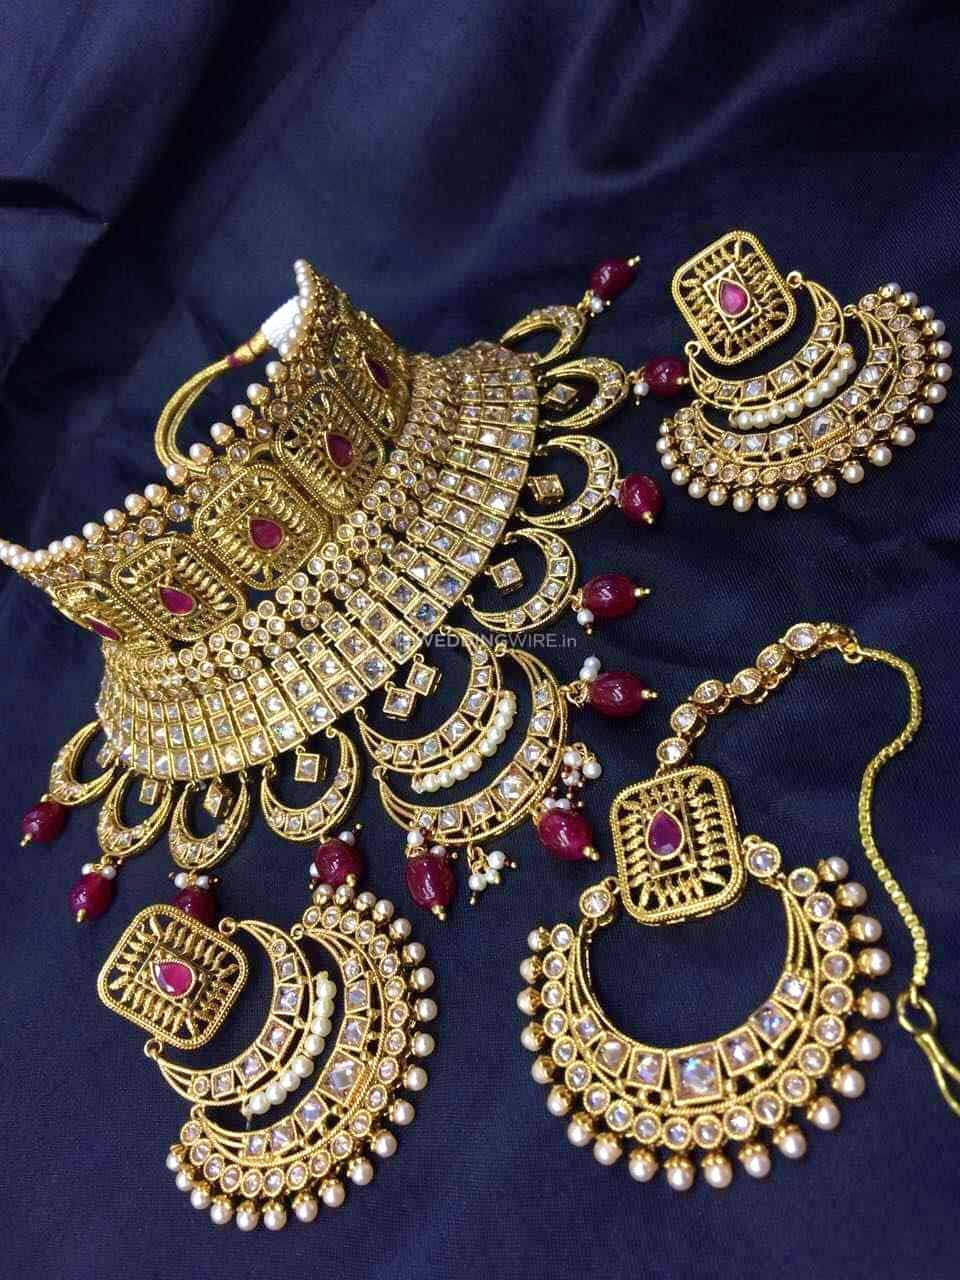 Buy Artificial Jewellery From This Shop At Throwaway Prices! | LBB